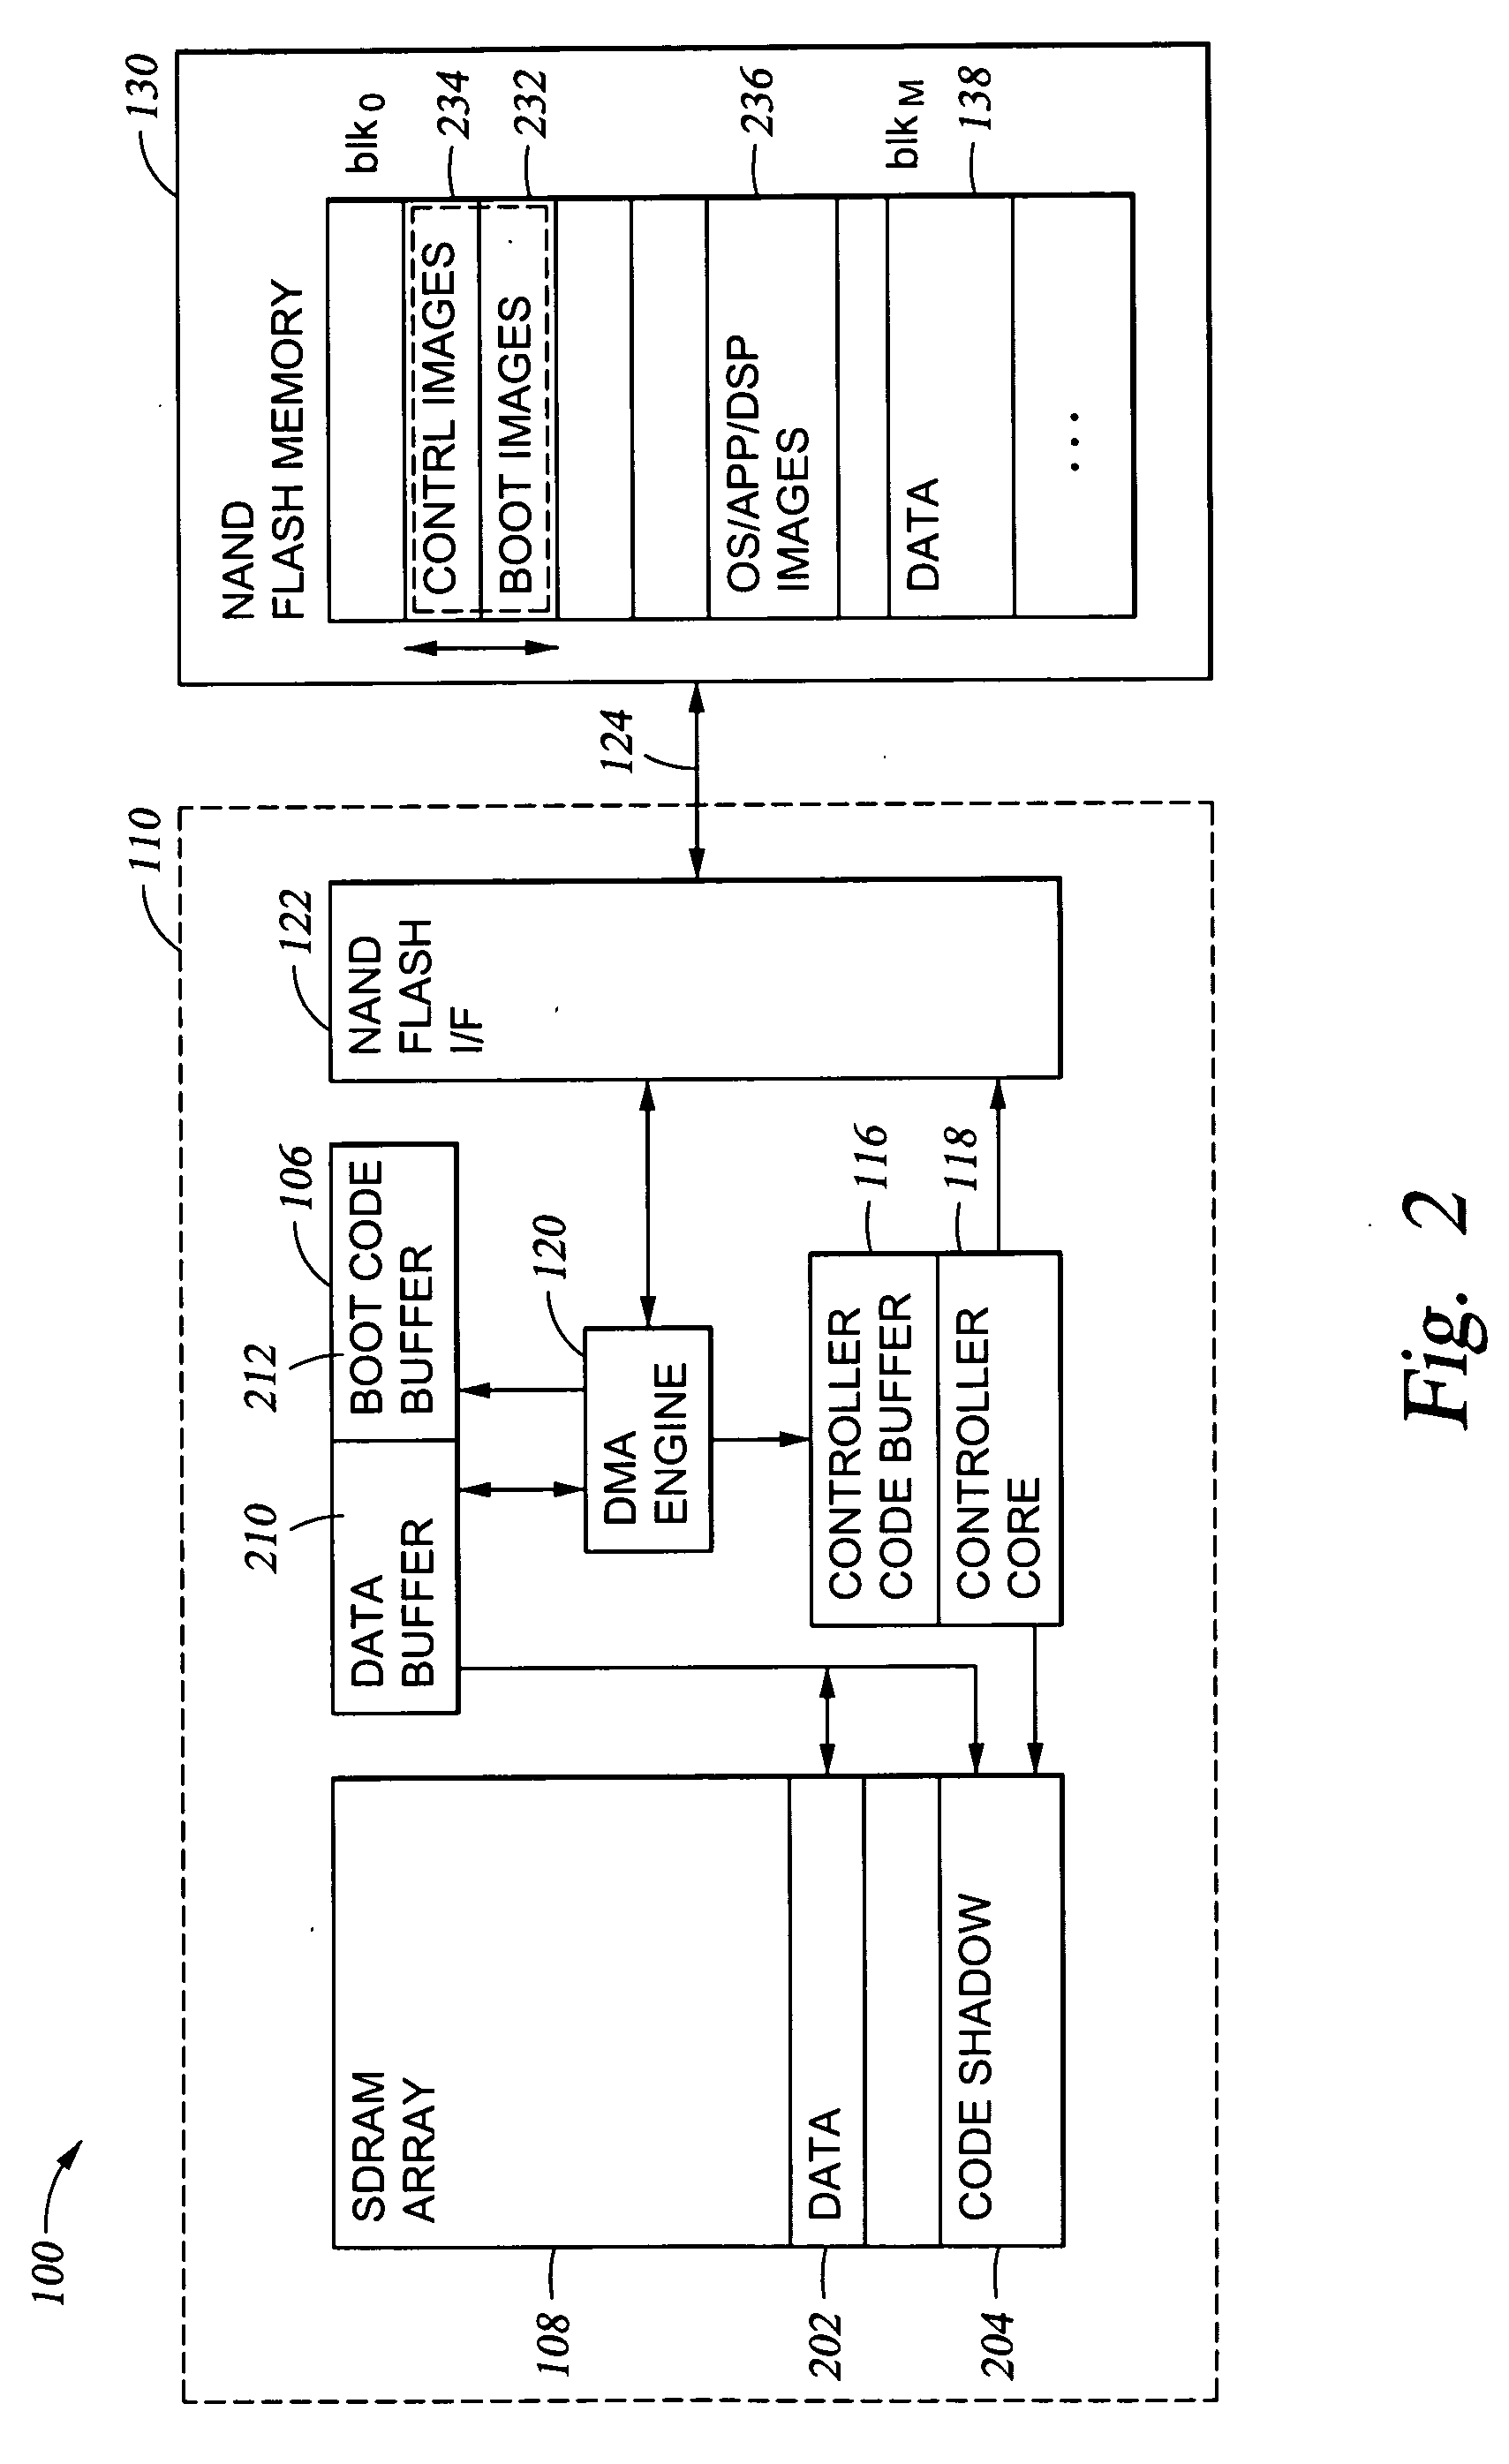 Method of system booting with a direct memory access in a new memory architecture